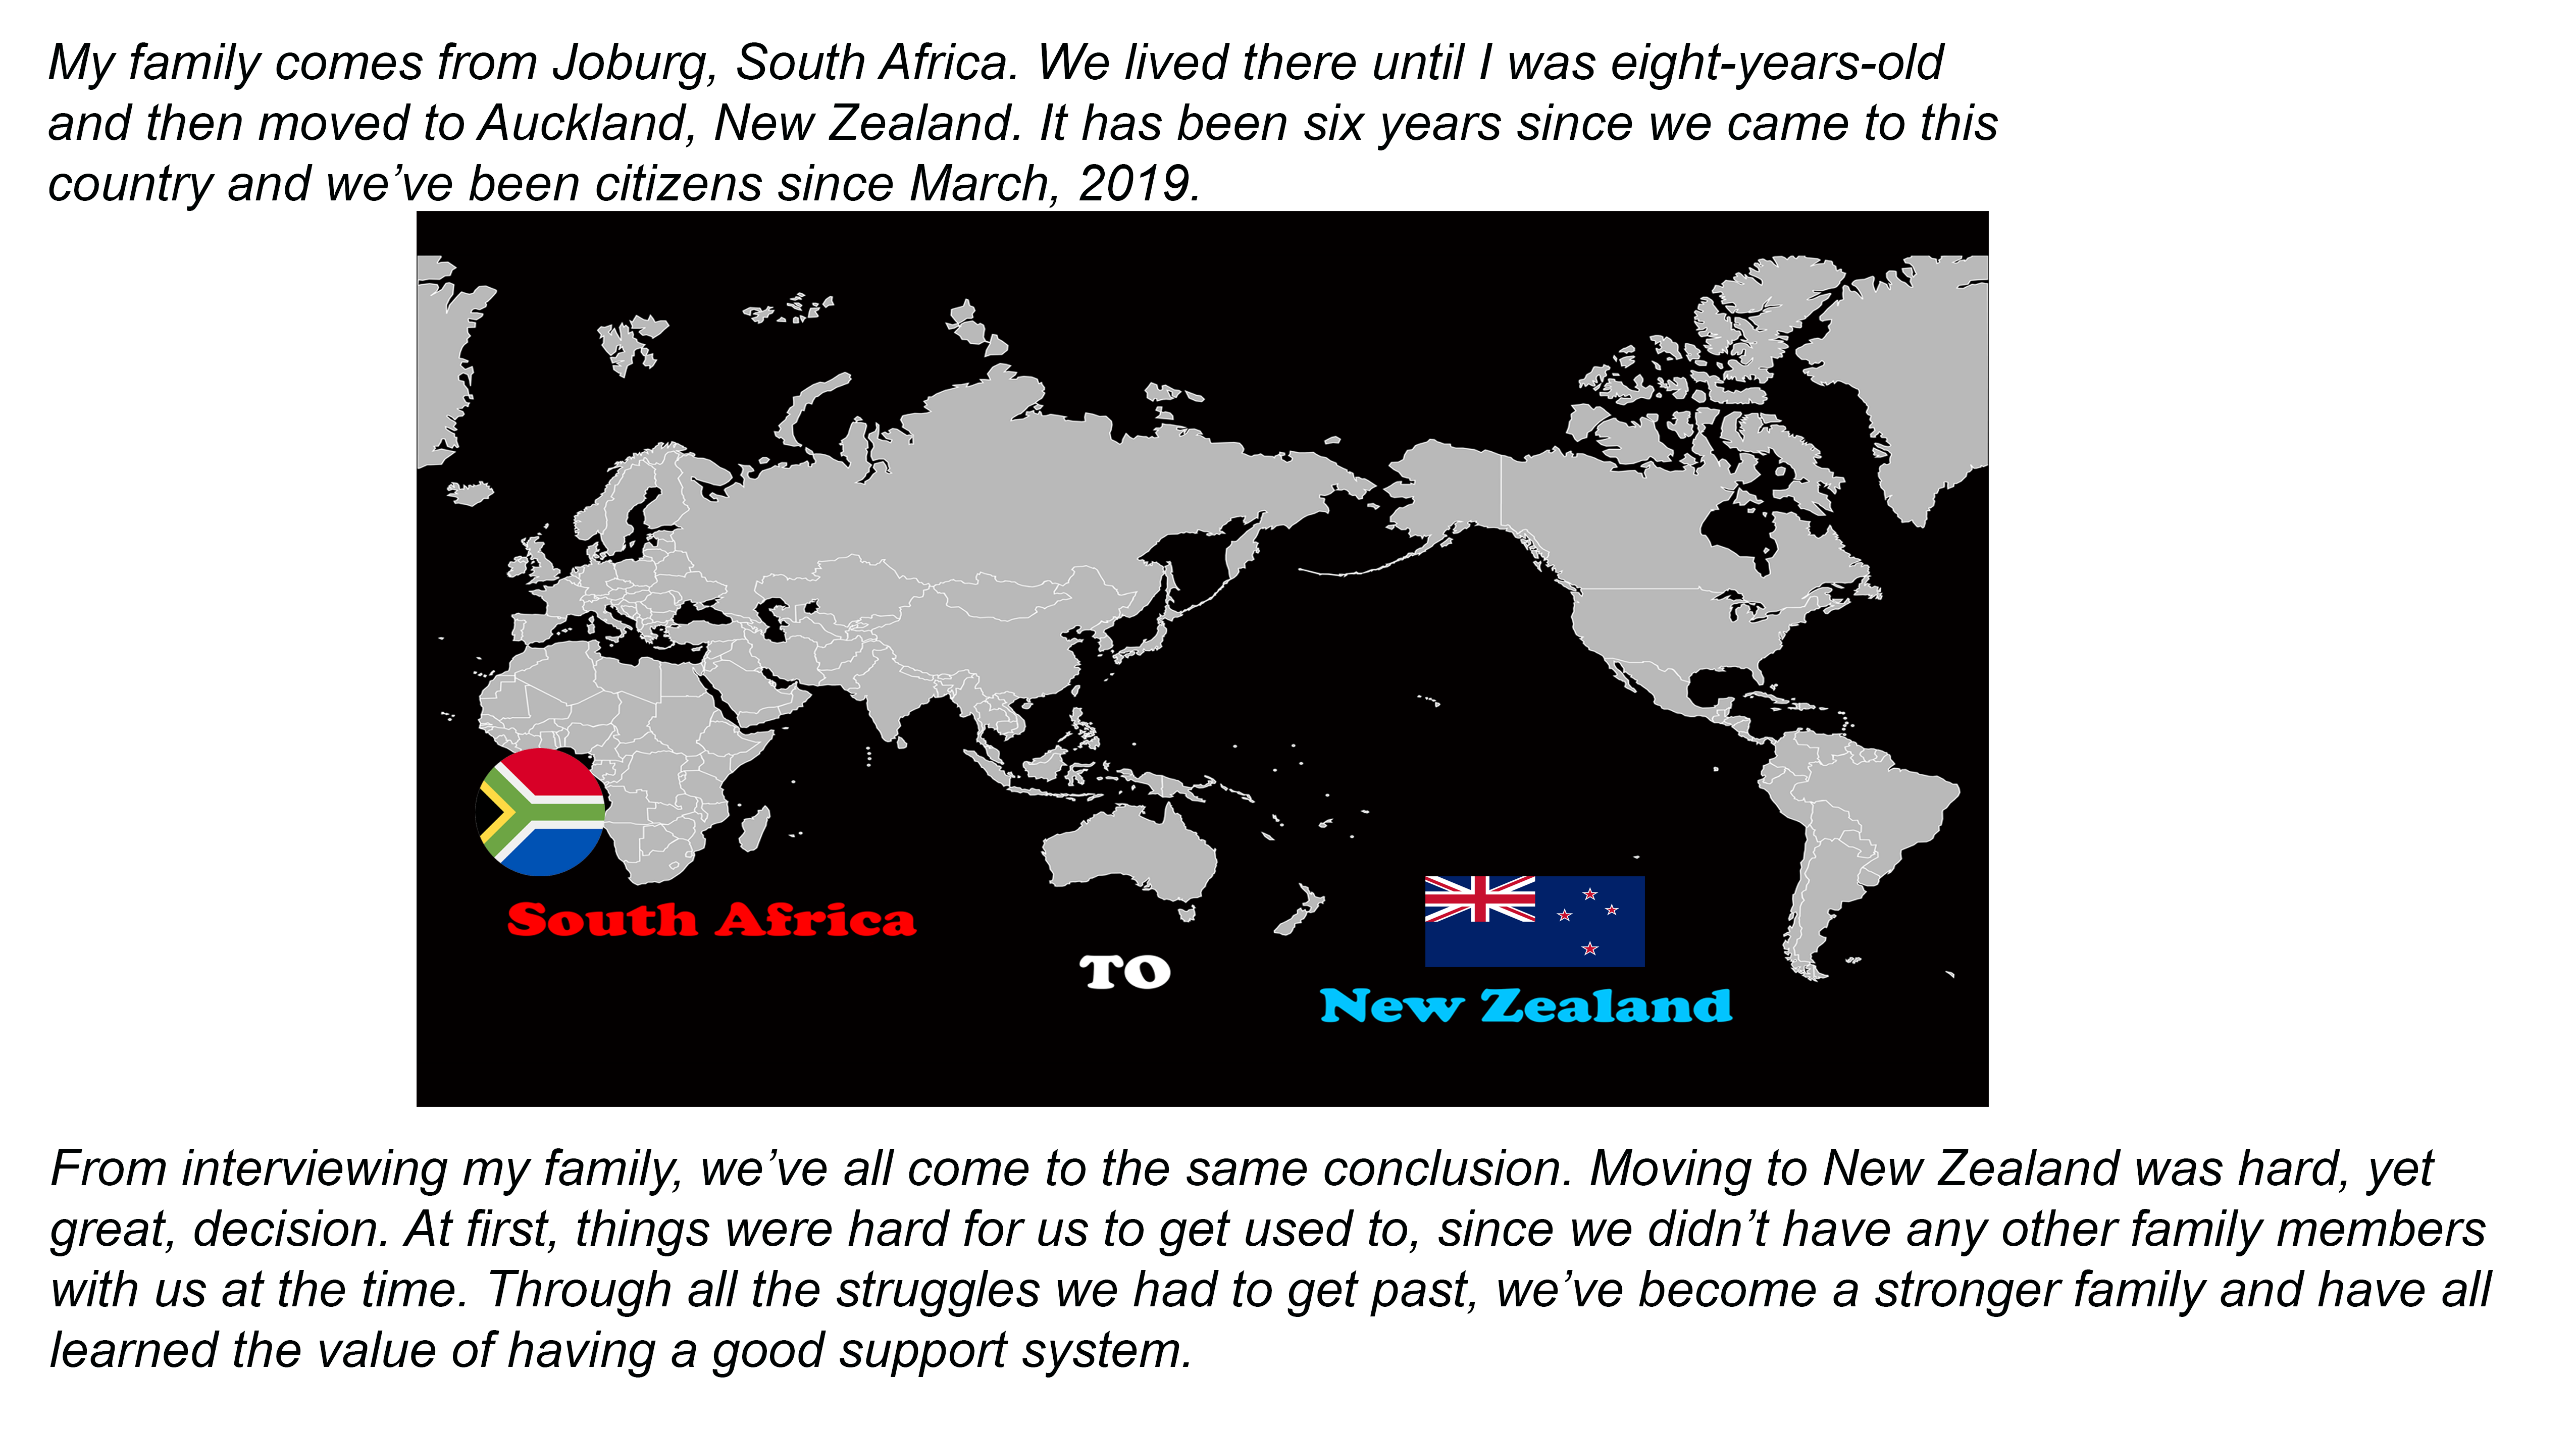 South Africa to New Zealand